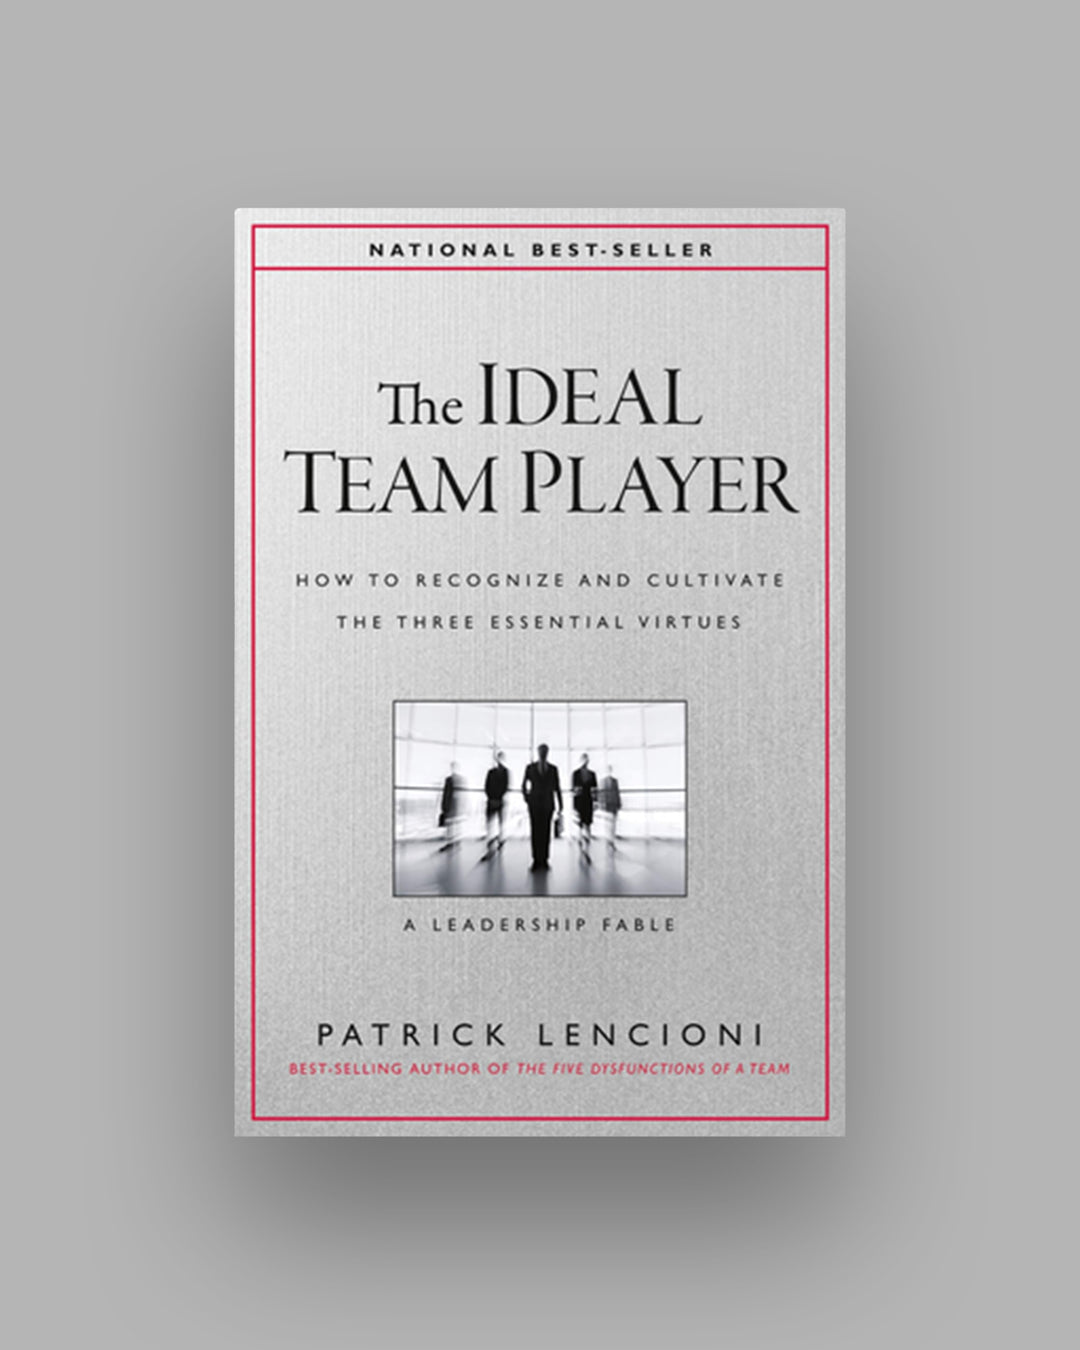 The Ideal Team Player:
A Leadership Fable About the Three Essential Virtues - Patrick M. Lencioni - Team Player